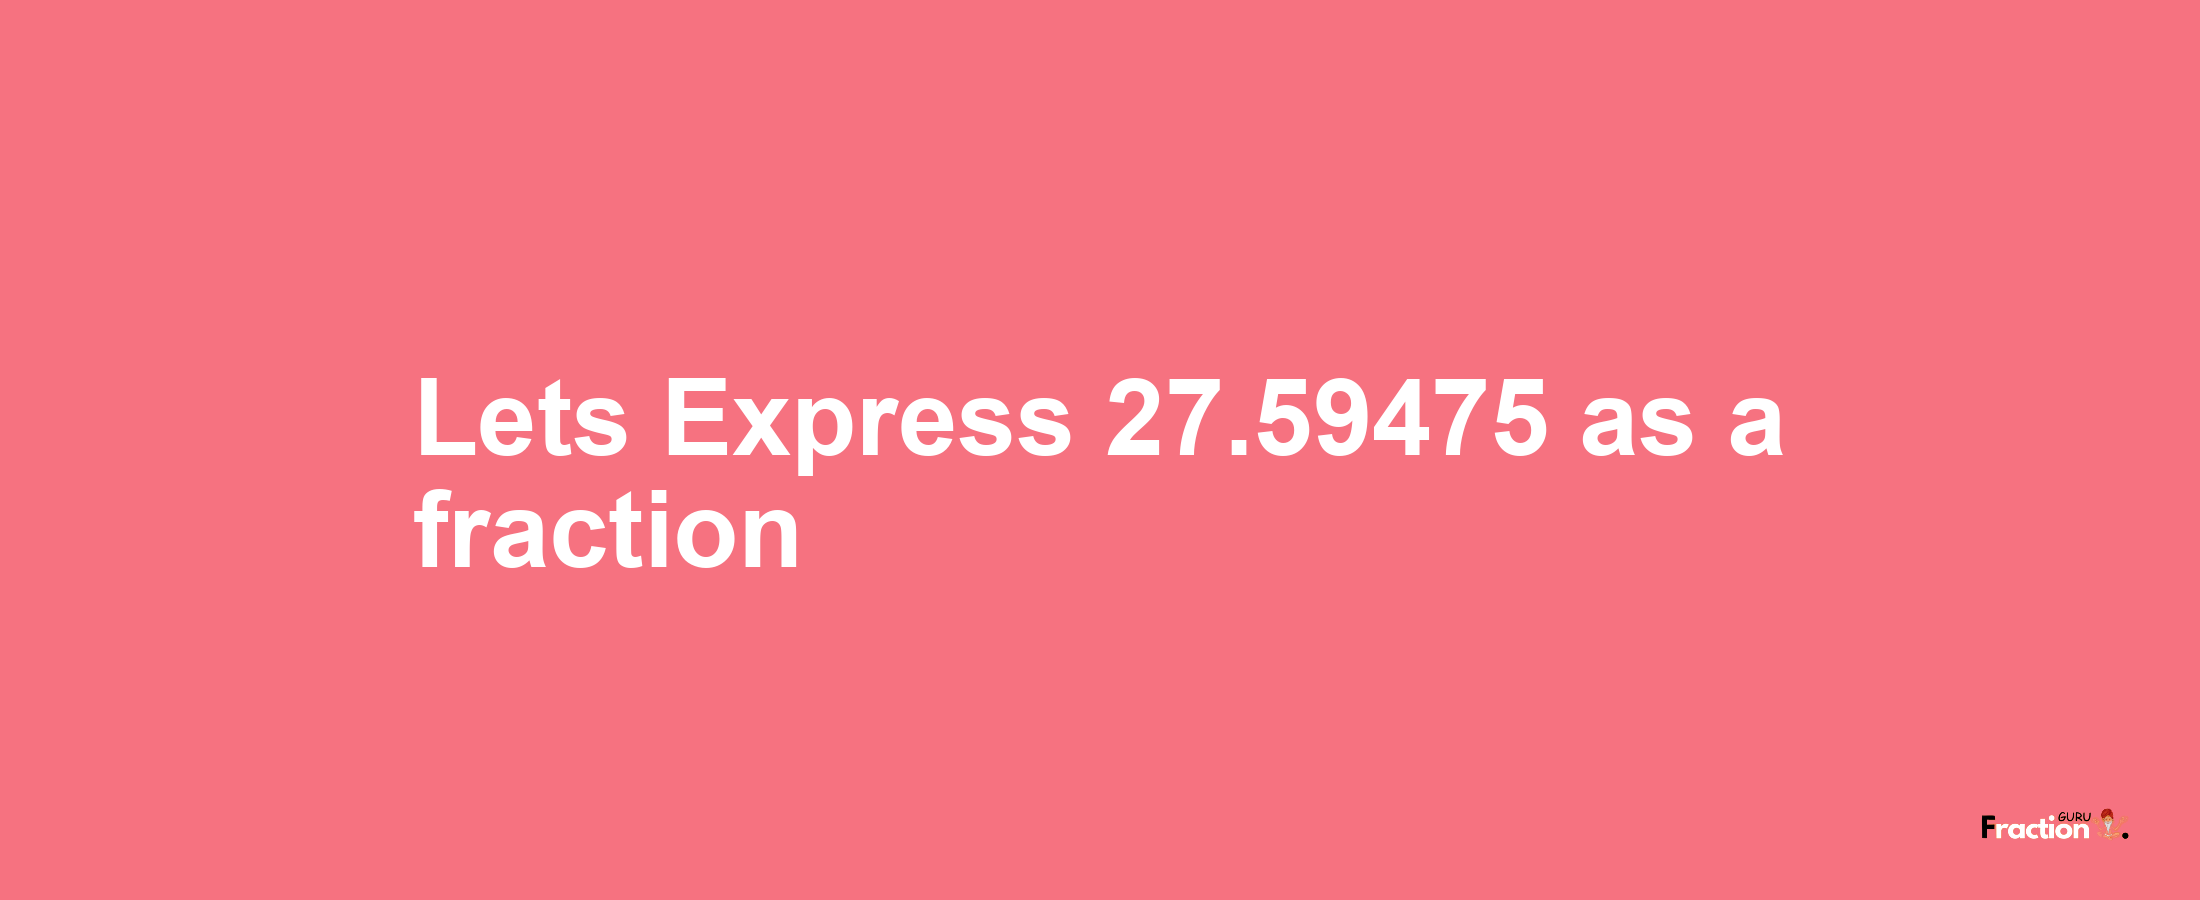 Lets Express 27.59475 as afraction